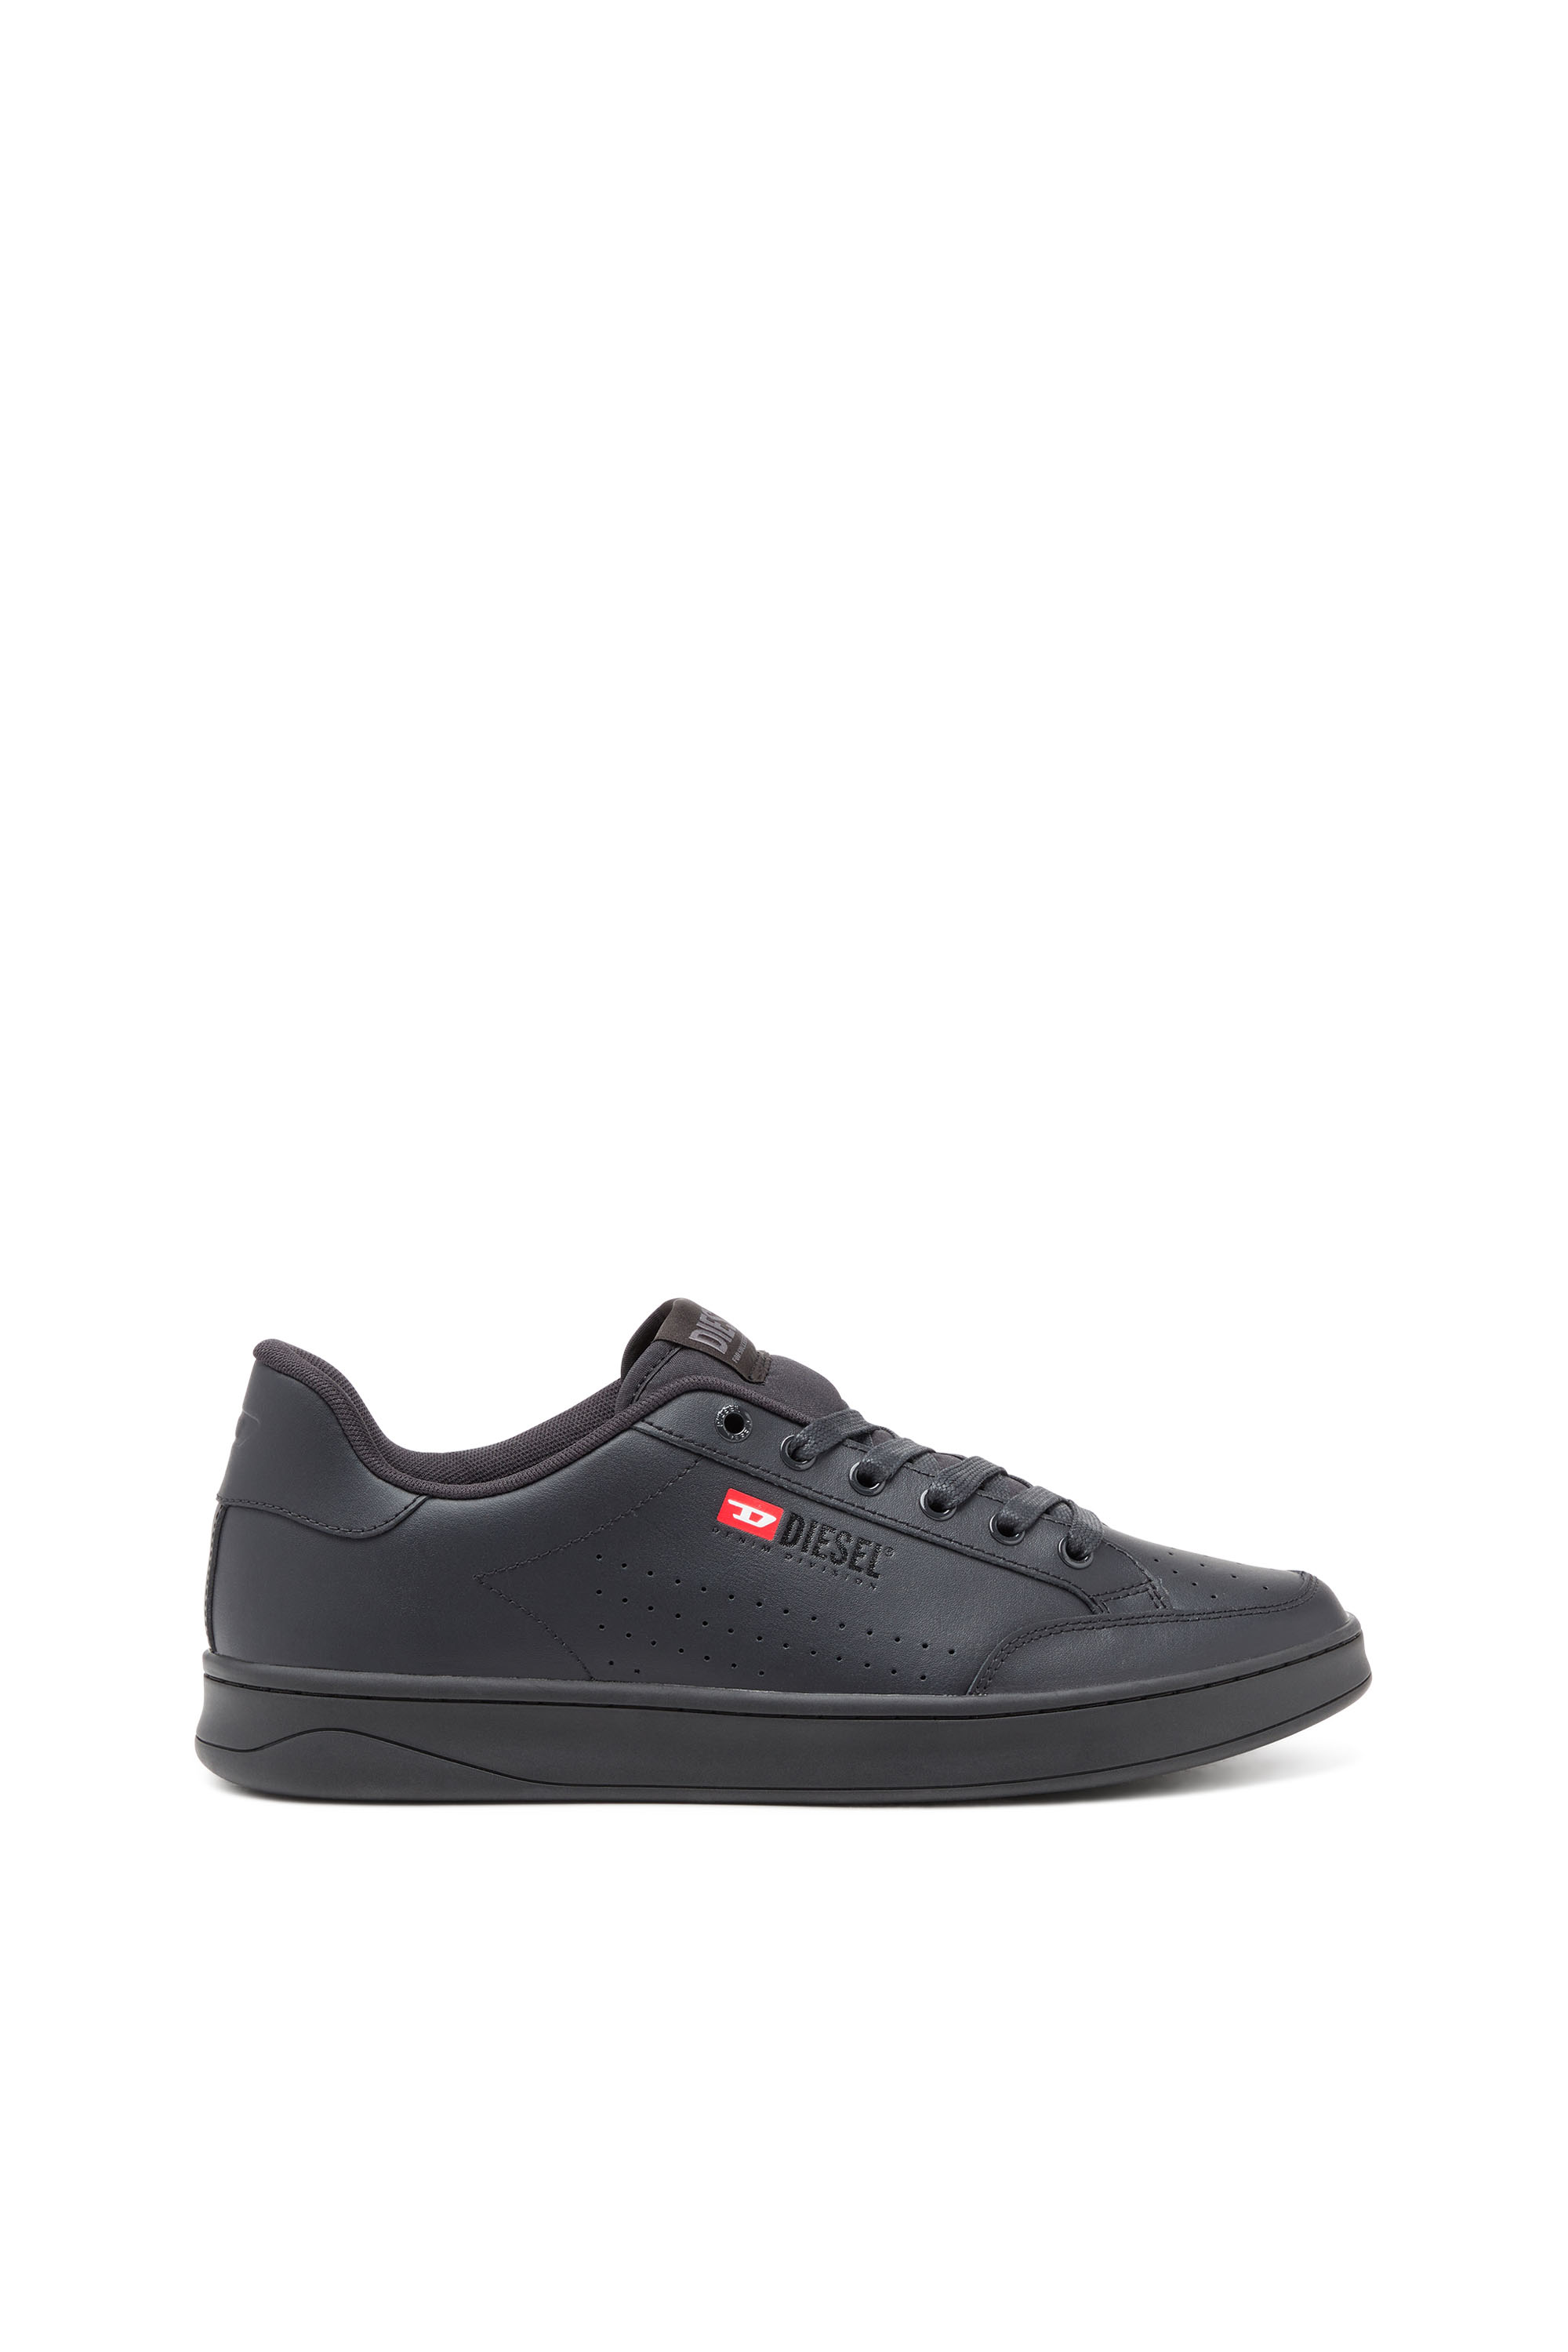 Diesel - S-ATHENE VTG, Man S-Athene-Low-top sneakers in leather and nylon in Black - Image 1